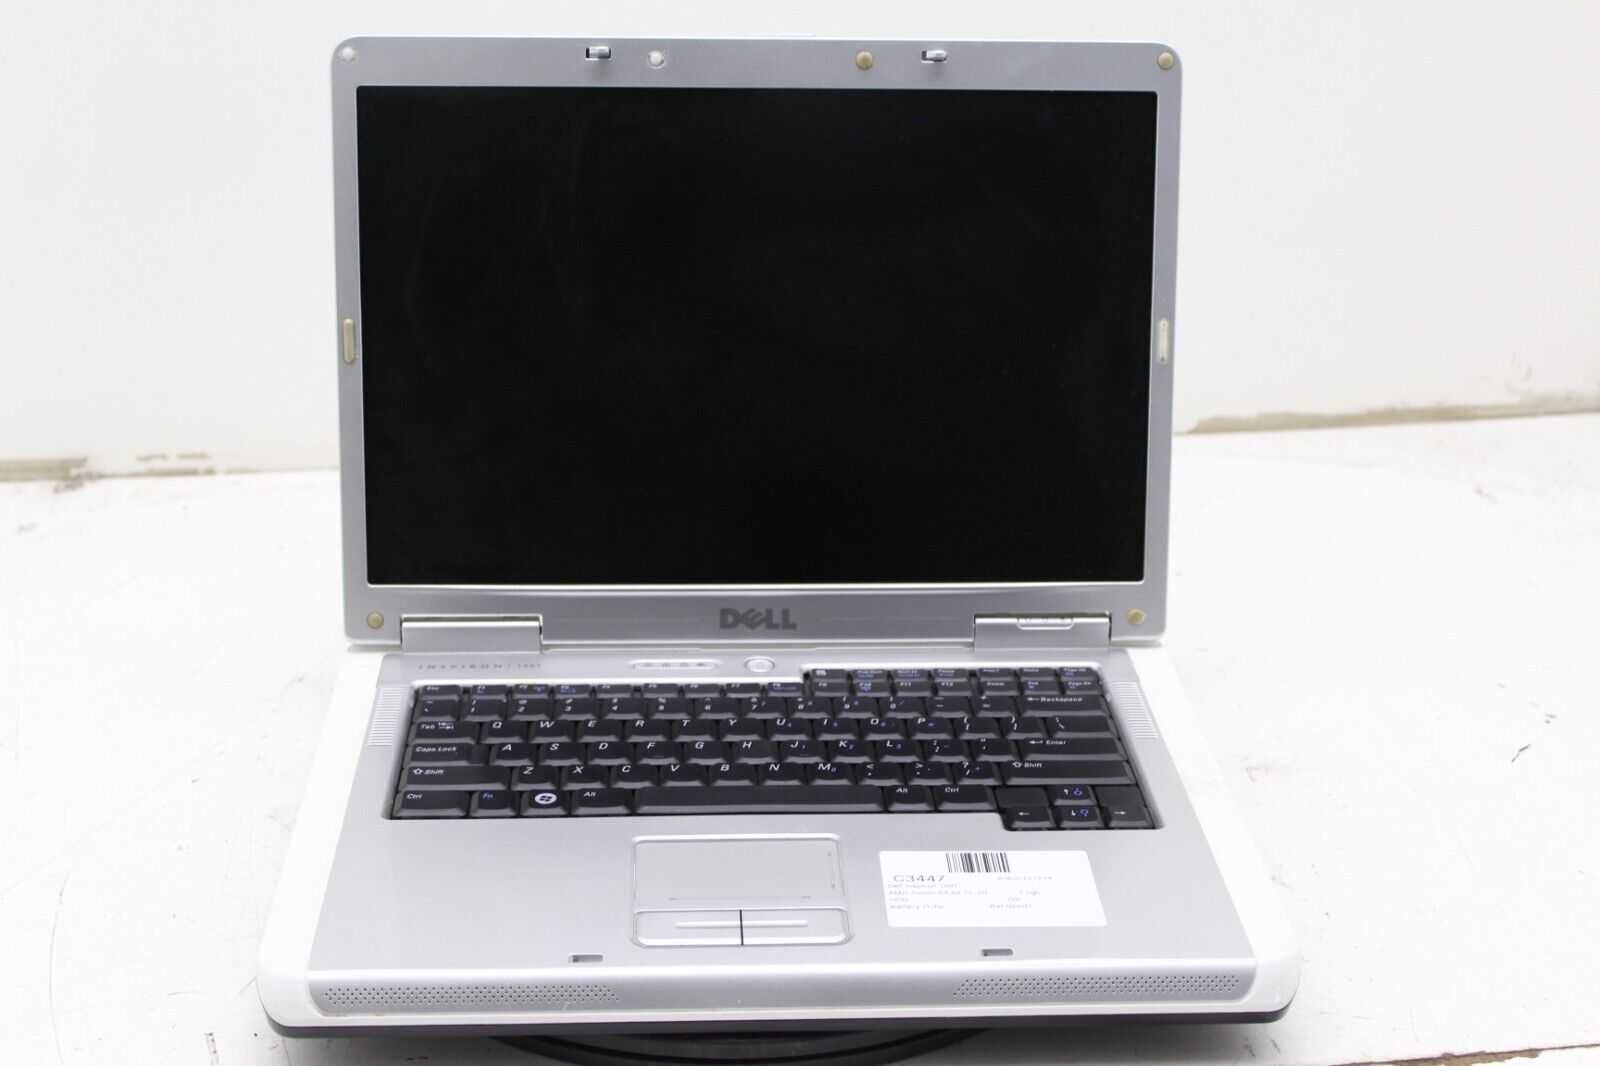 Dell Inspiron 1501 Laptop AMD Turion 64 x2 1.5GB Ram No HDD or Battery